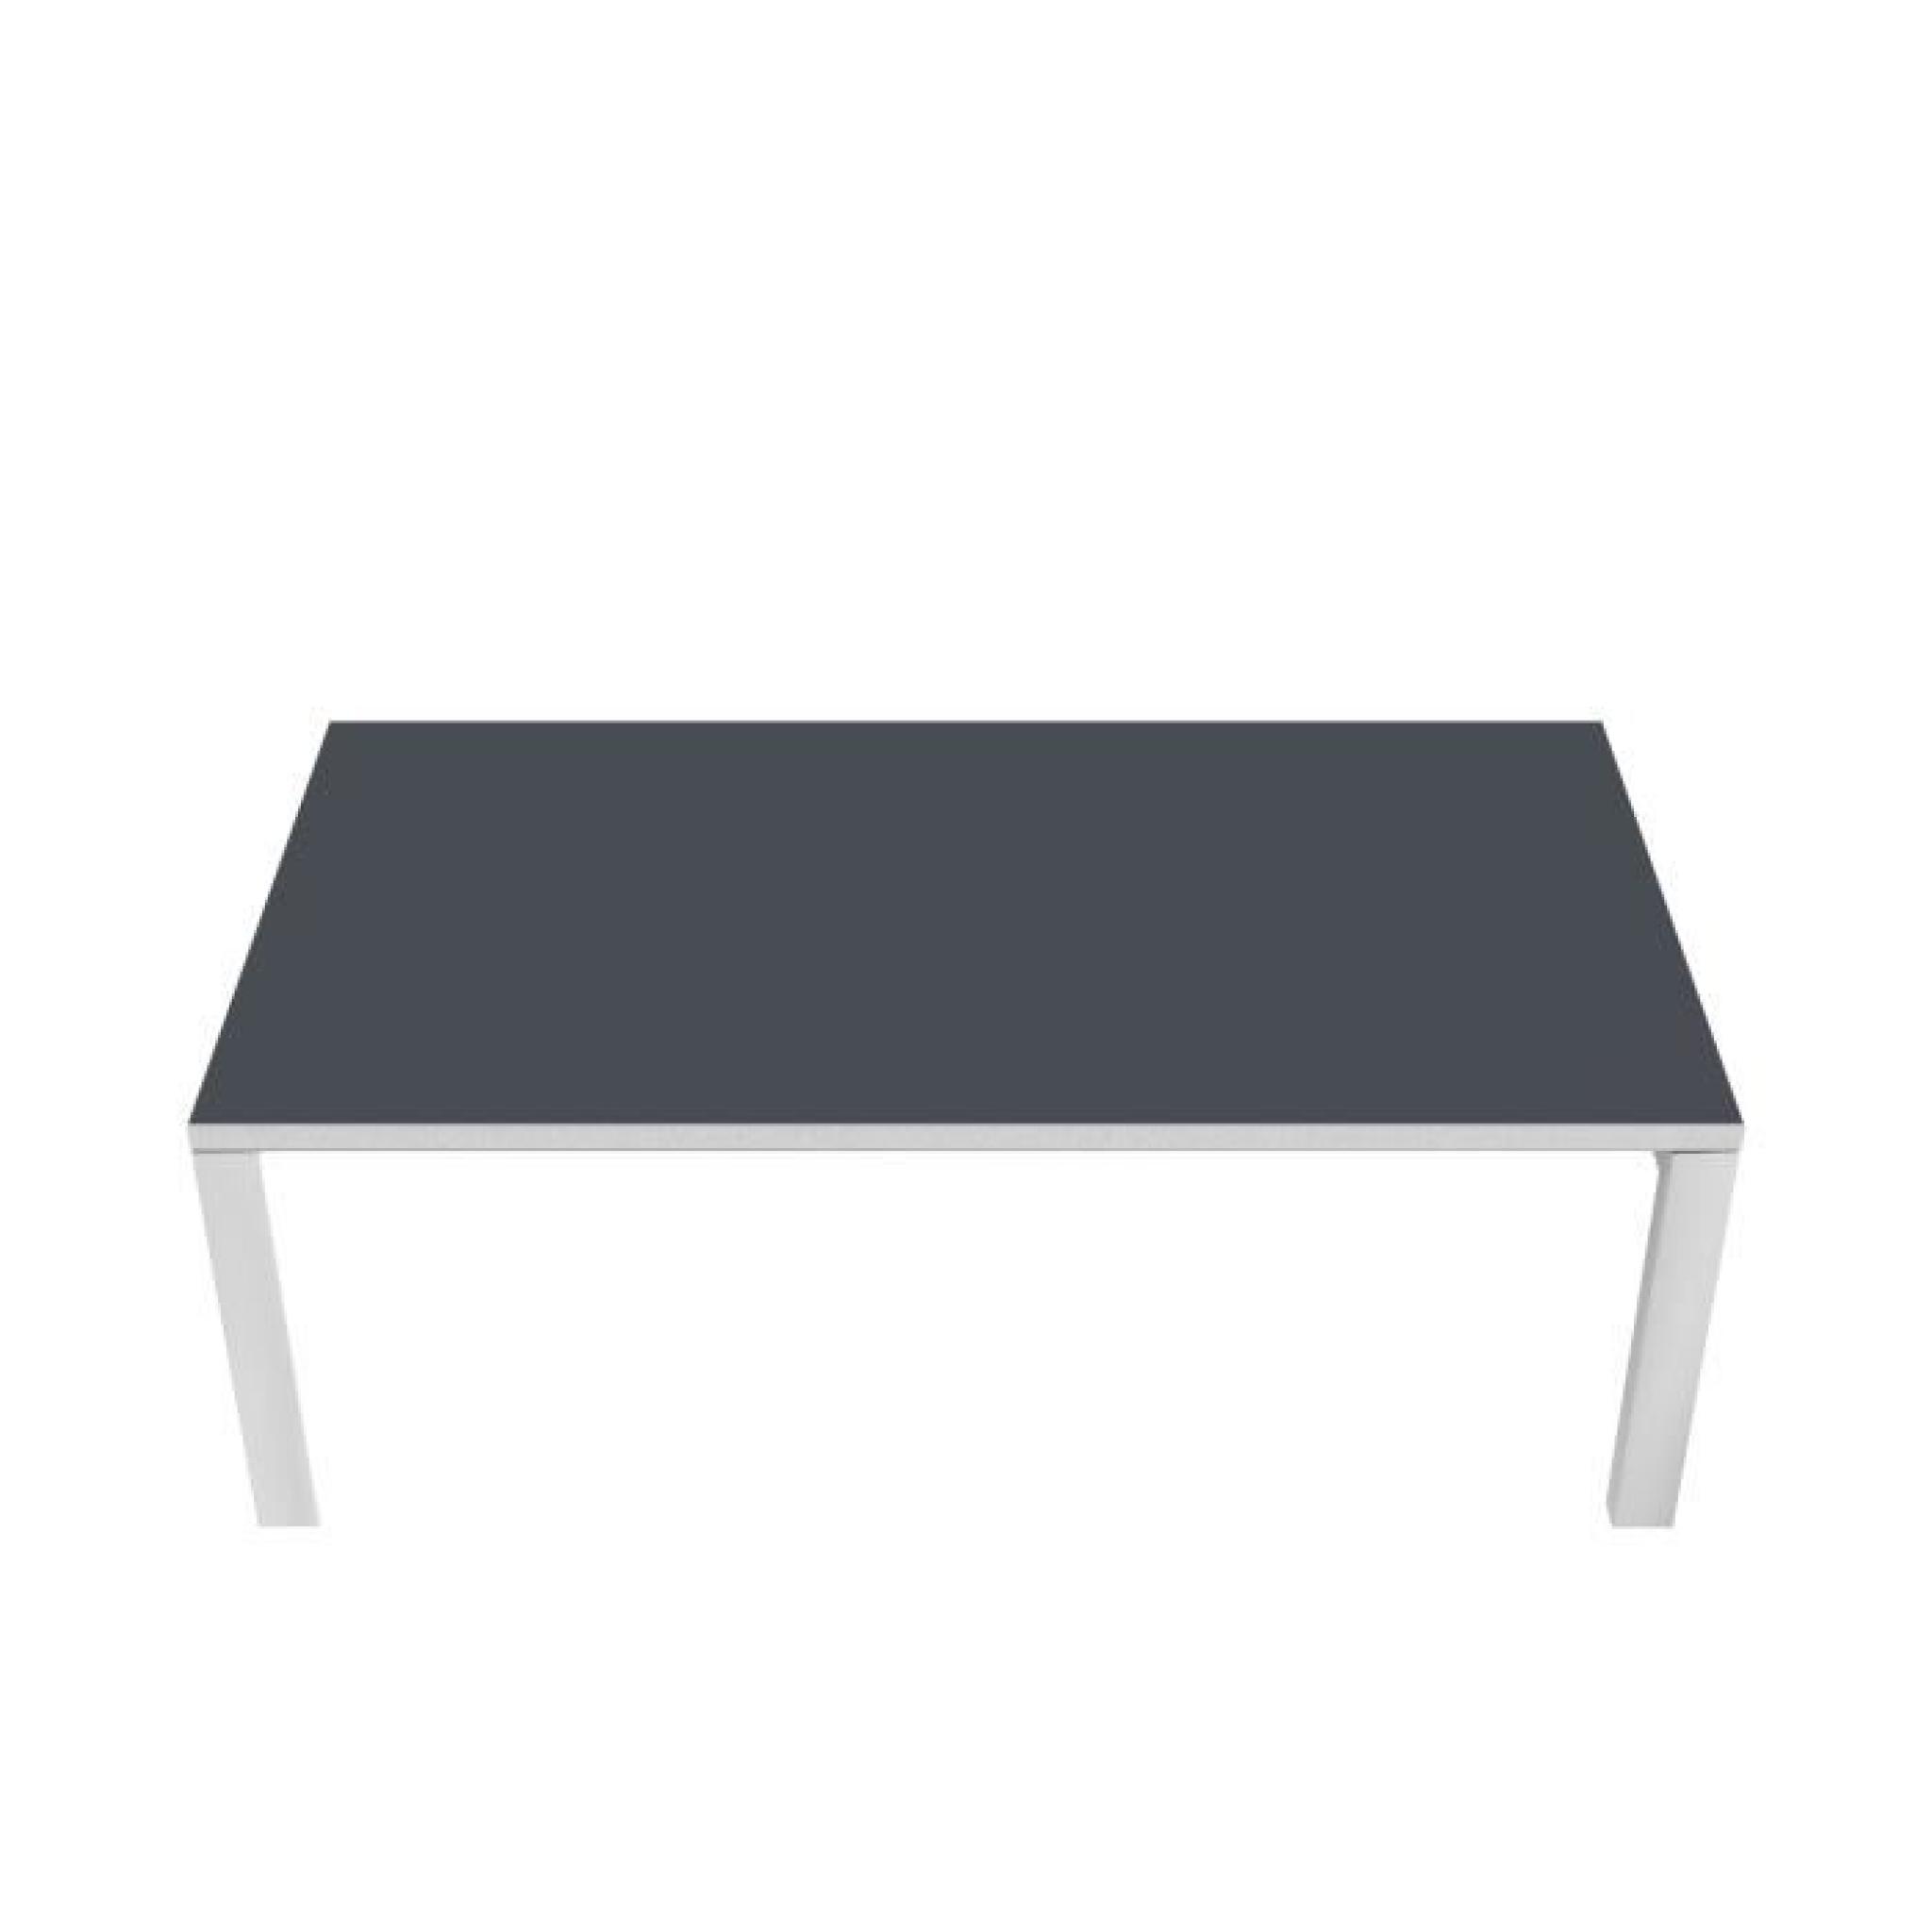 Table d'accueil design EasyWork ATYLIA Couleur Anthracite